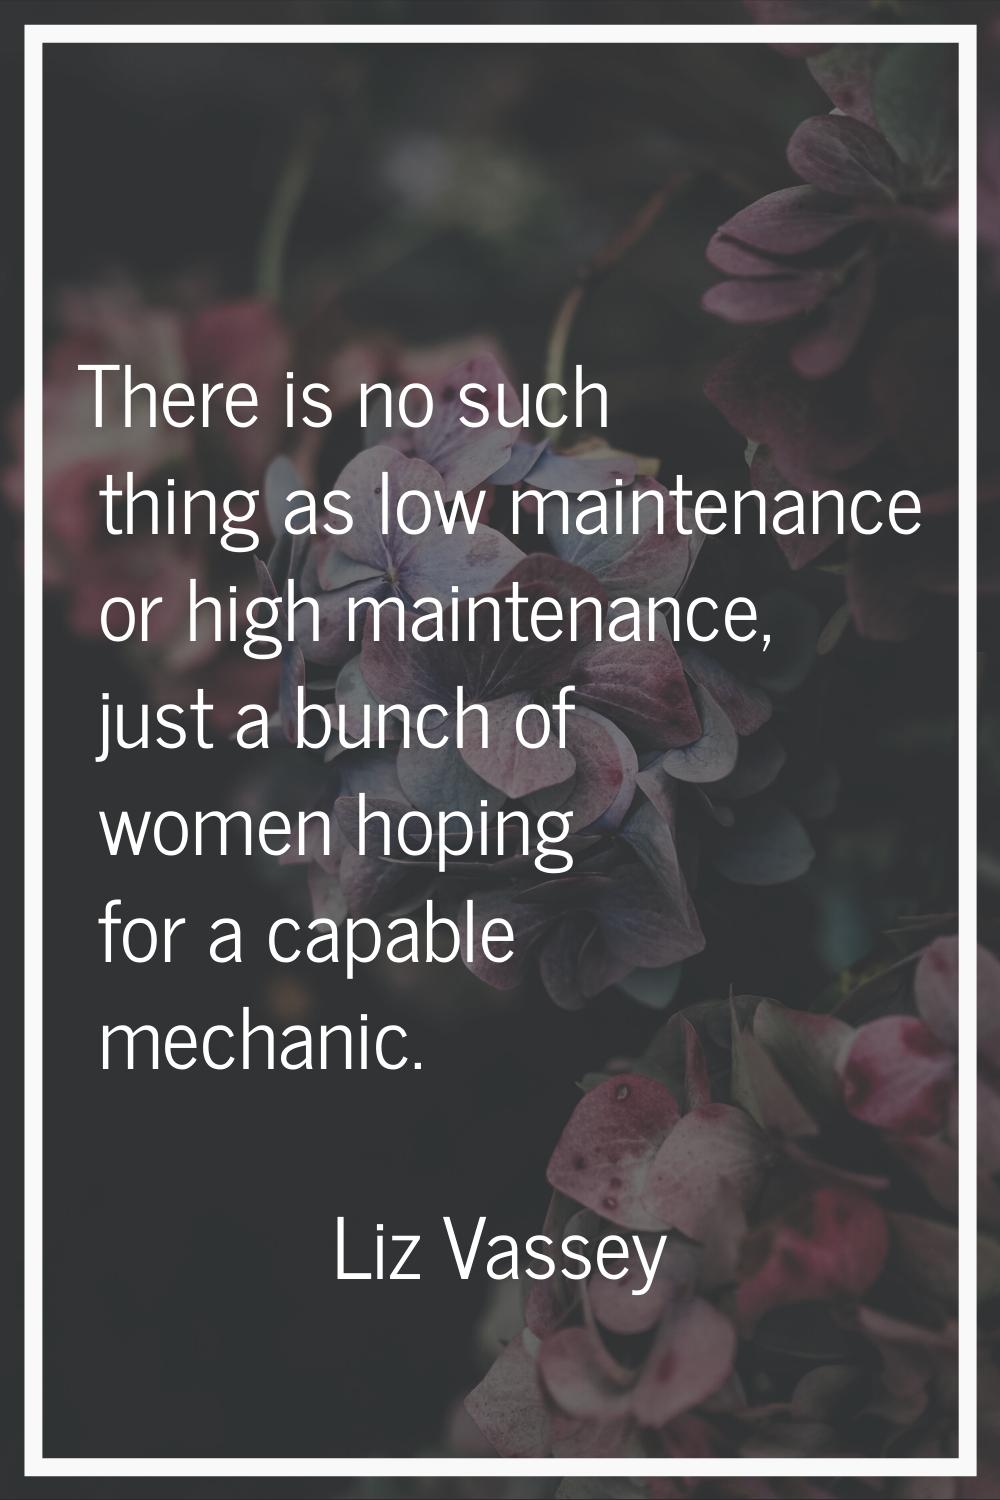 There is no such thing as low maintenance or high maintenance, just a bunch of women hoping for a c